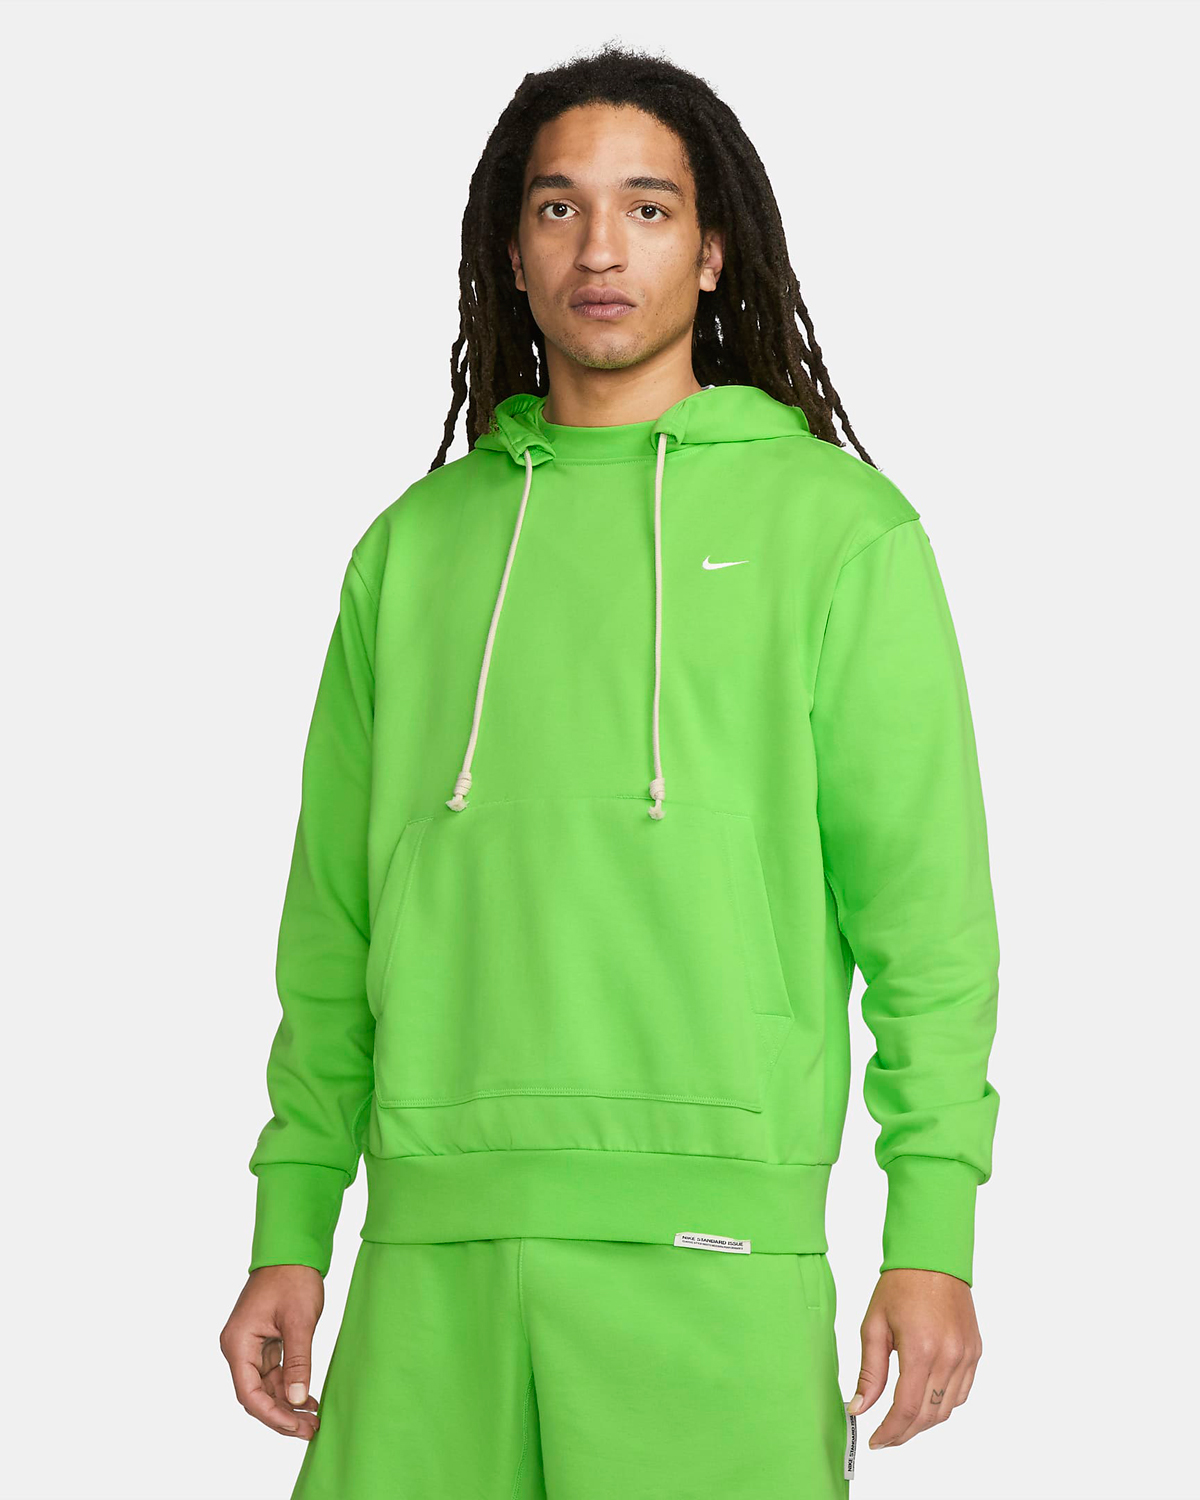 Nike-Standard-Issue-Hoodie-Action-Green